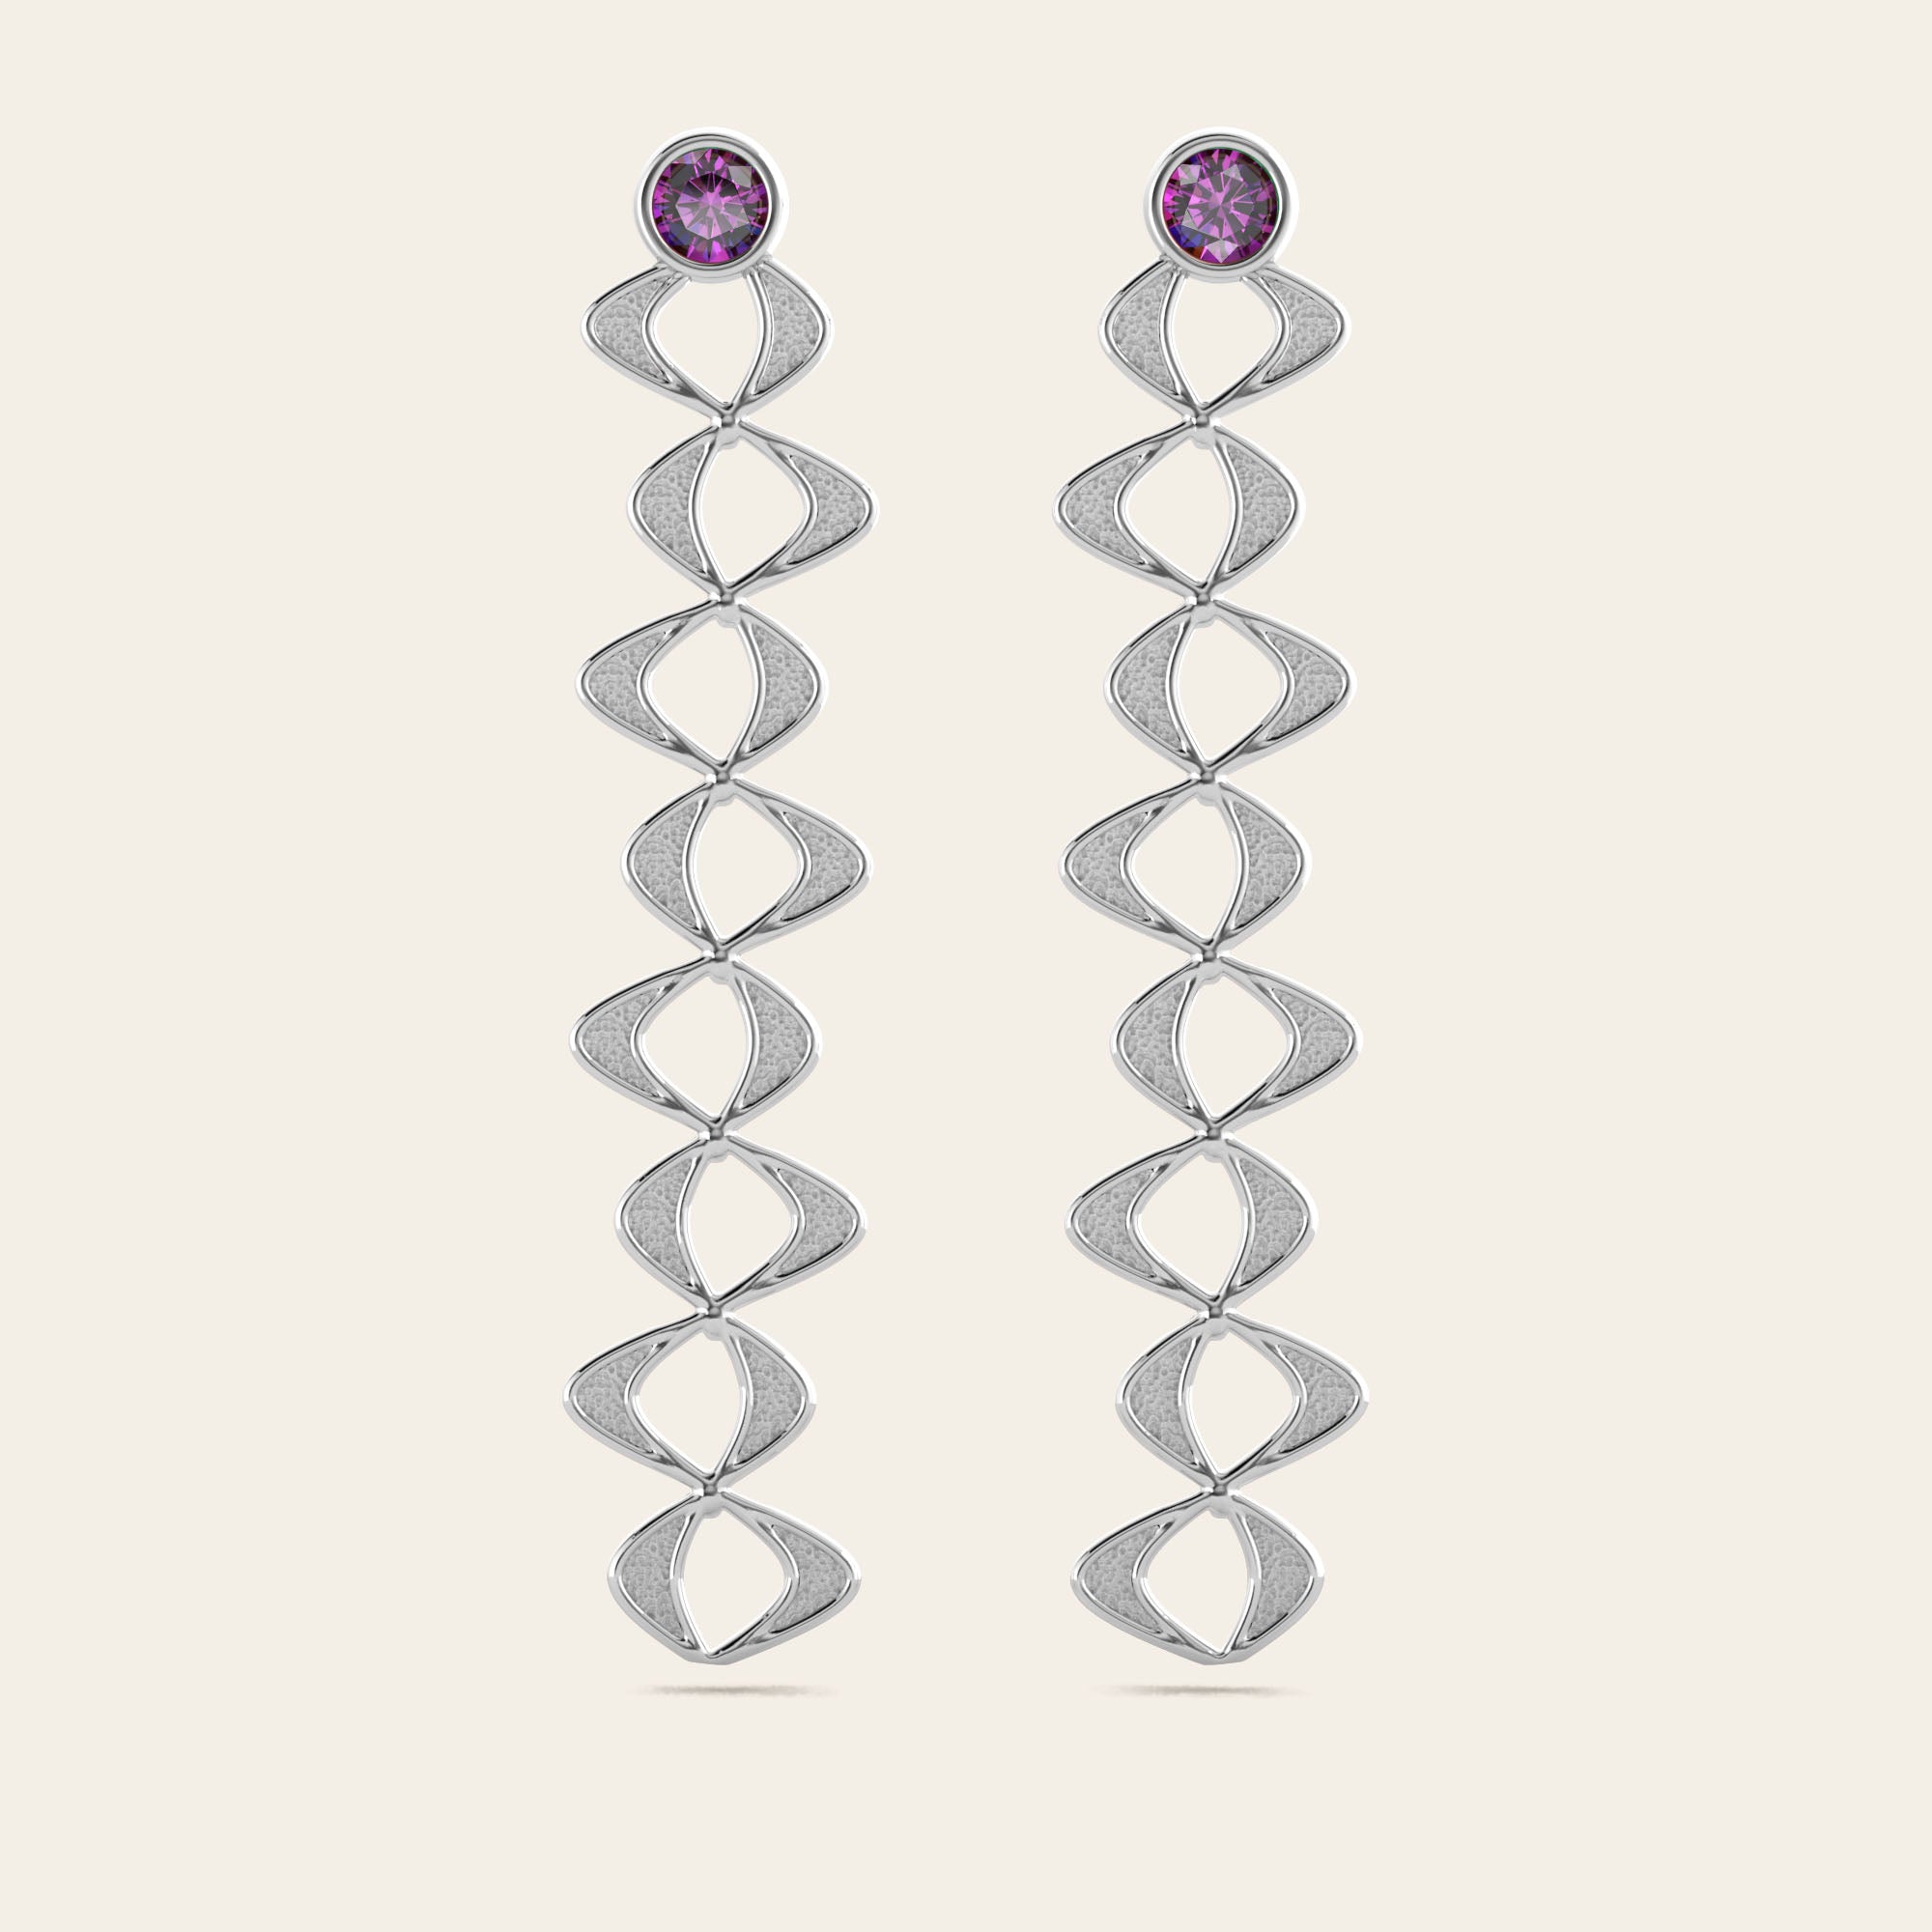 Flowing Double Cadence Earrings with Purple Garnets in 18k White Gold